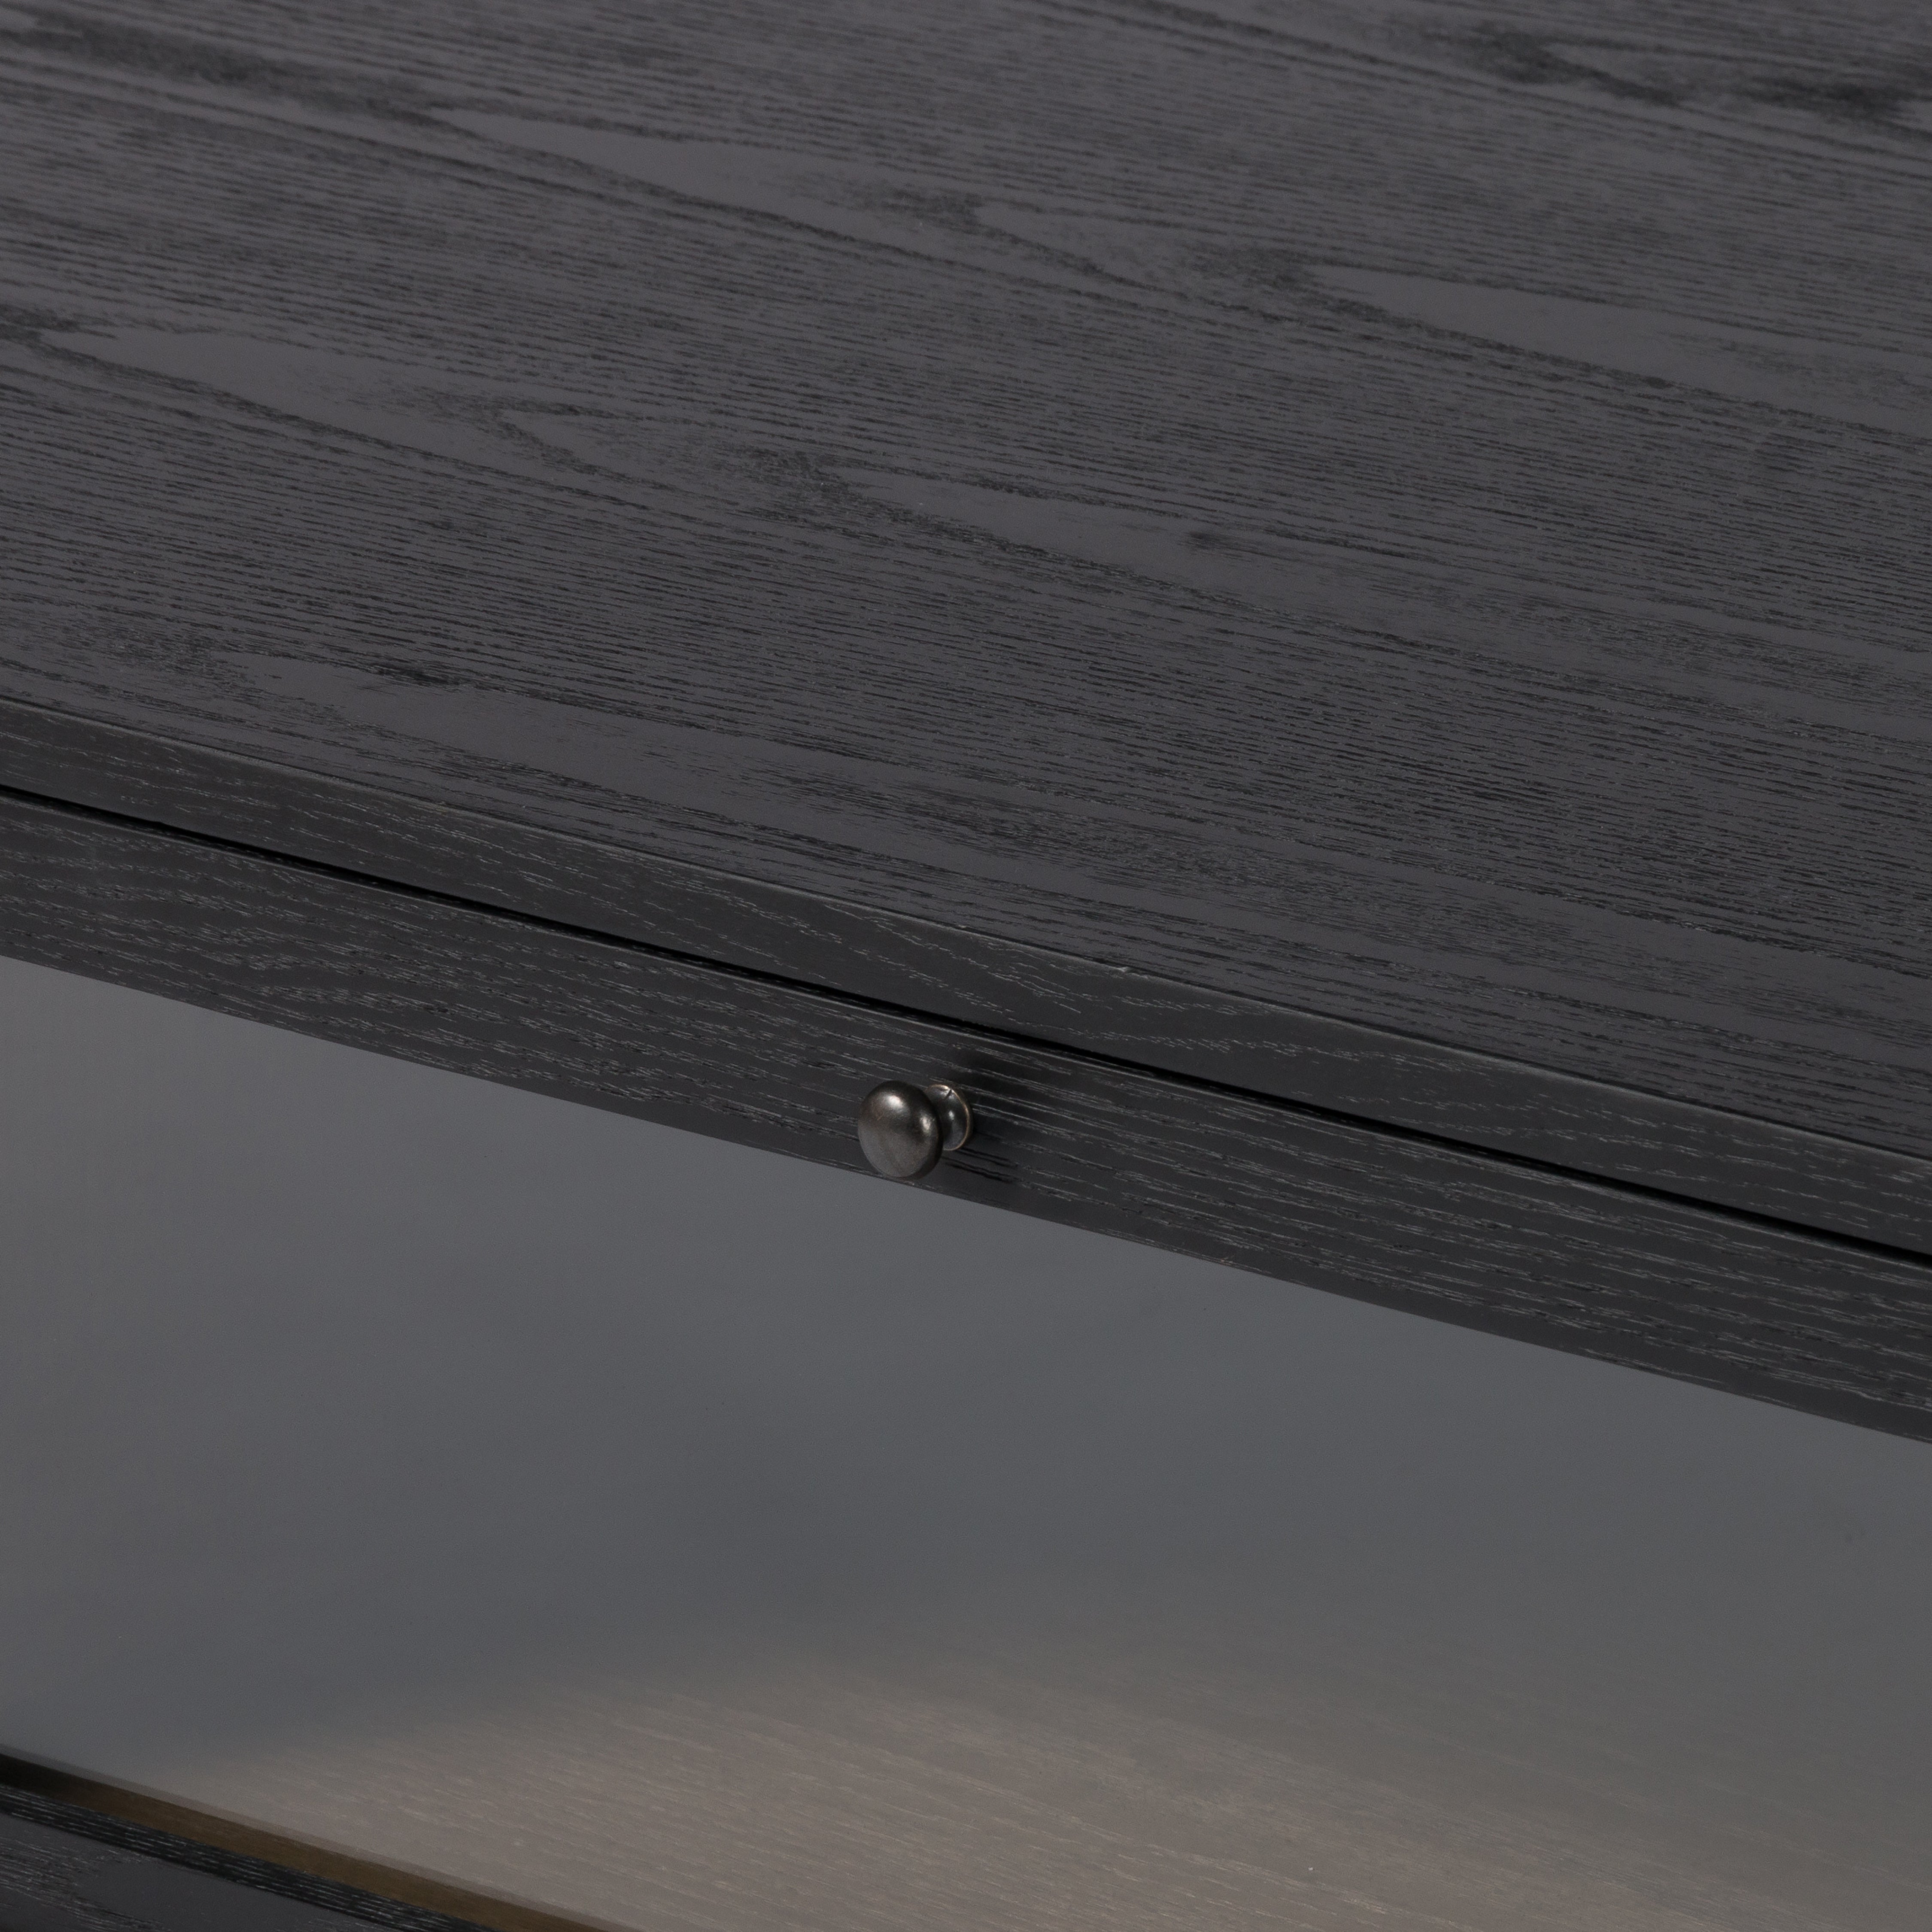 Millie Coffee Table-Drifted Matte Black - StyleMeGHD - 